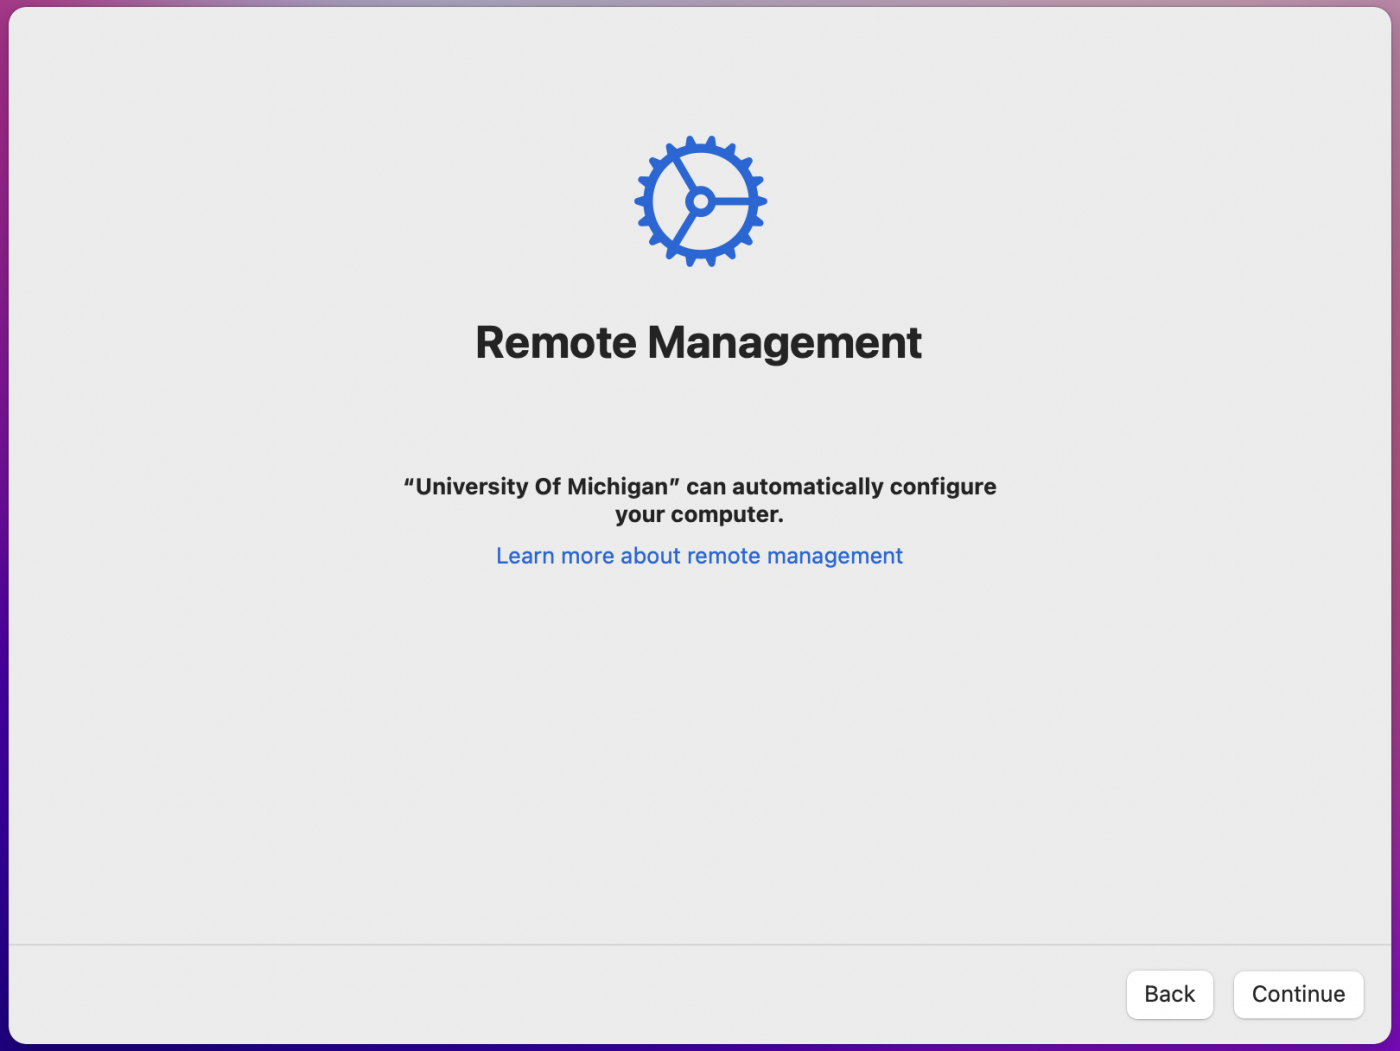 remote management screen